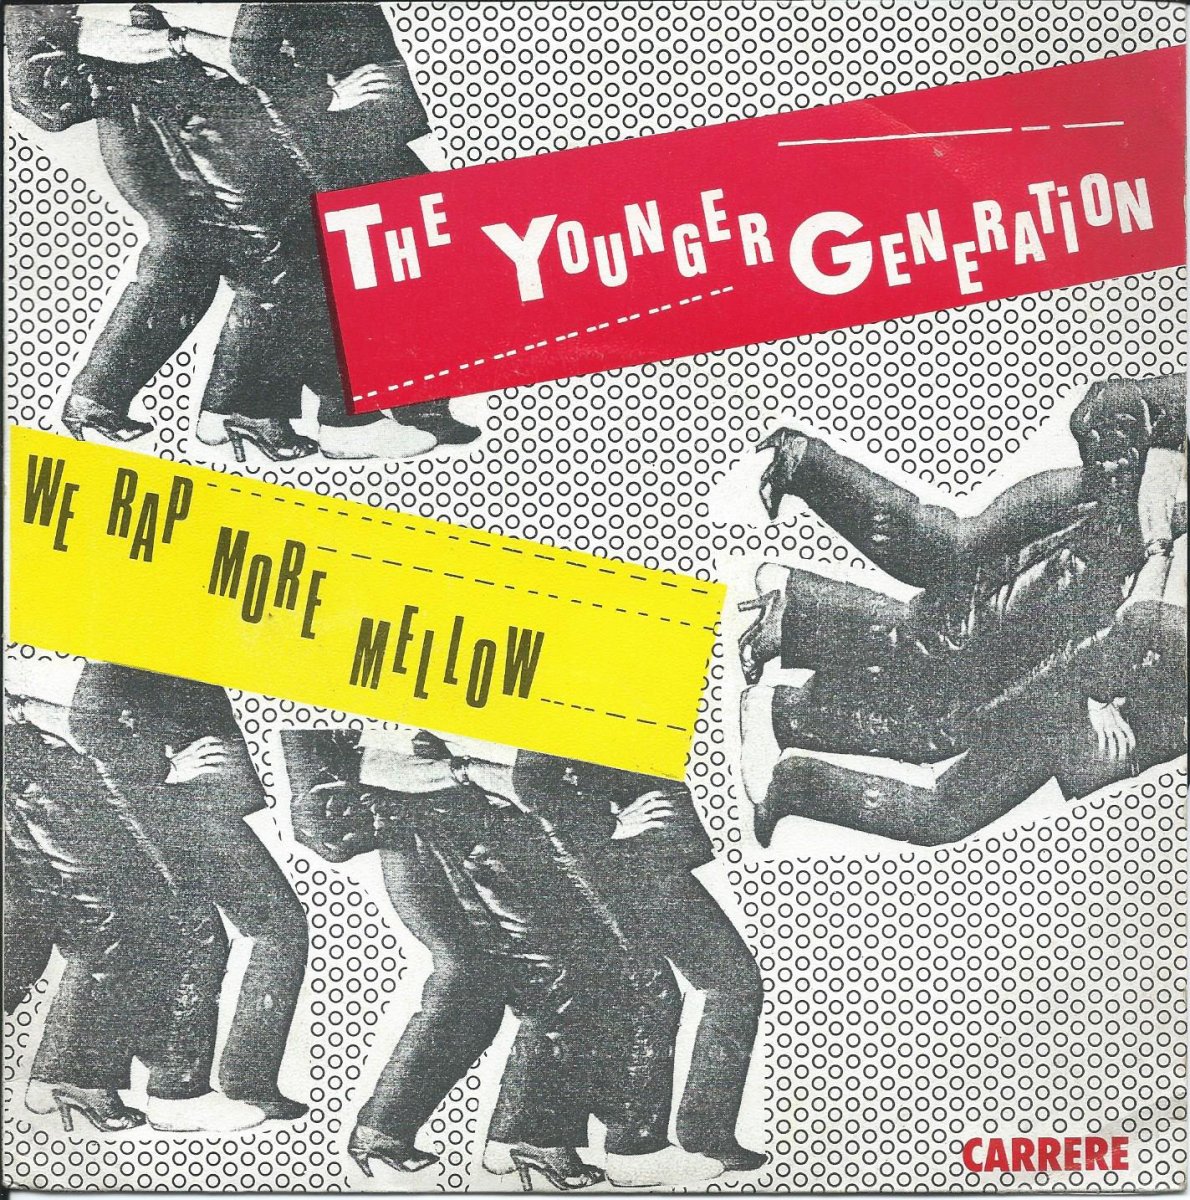 THE YOUNGER GENERATION / WE RAP MORE MELLOW (7